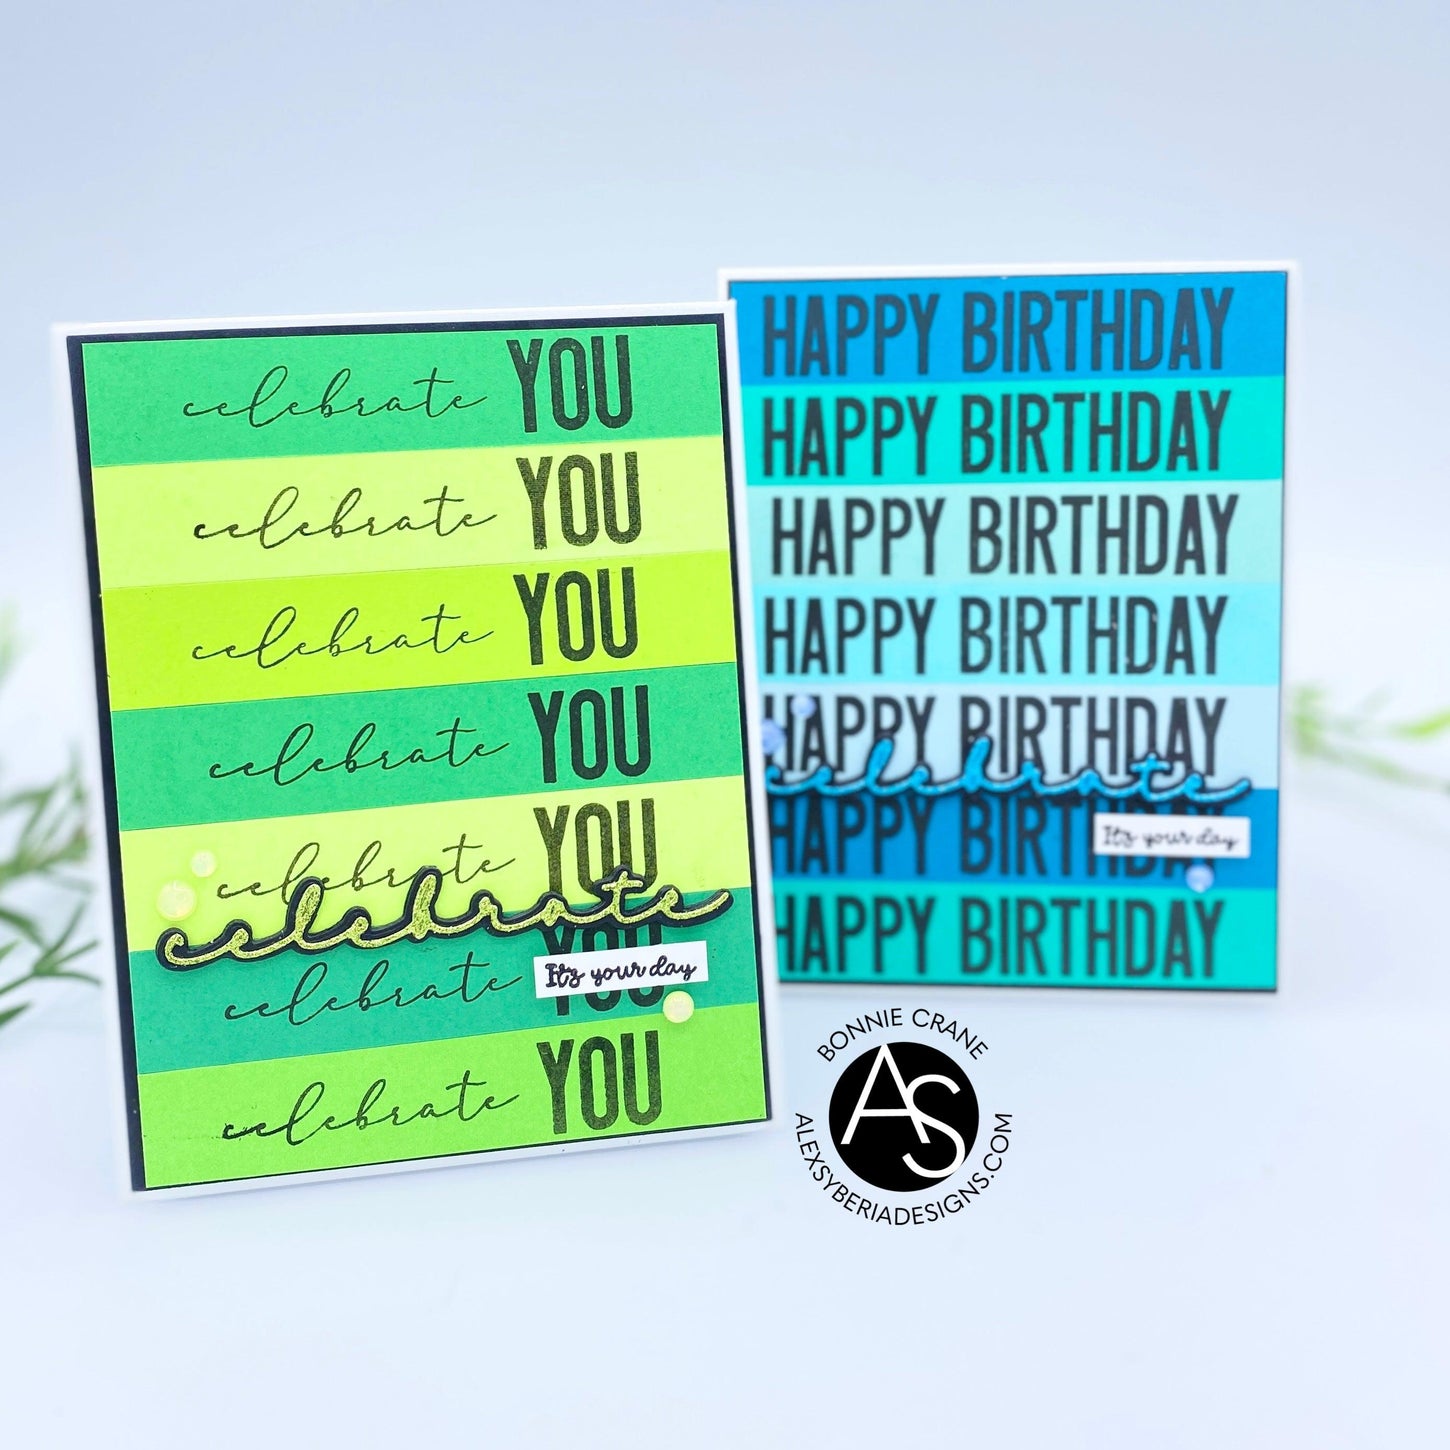 alex-syberia-designs-birthday-wishes-stamp-set-cardmaking-scrapbooking-birthday-celebrate-your-day-sentiments-cas-cards